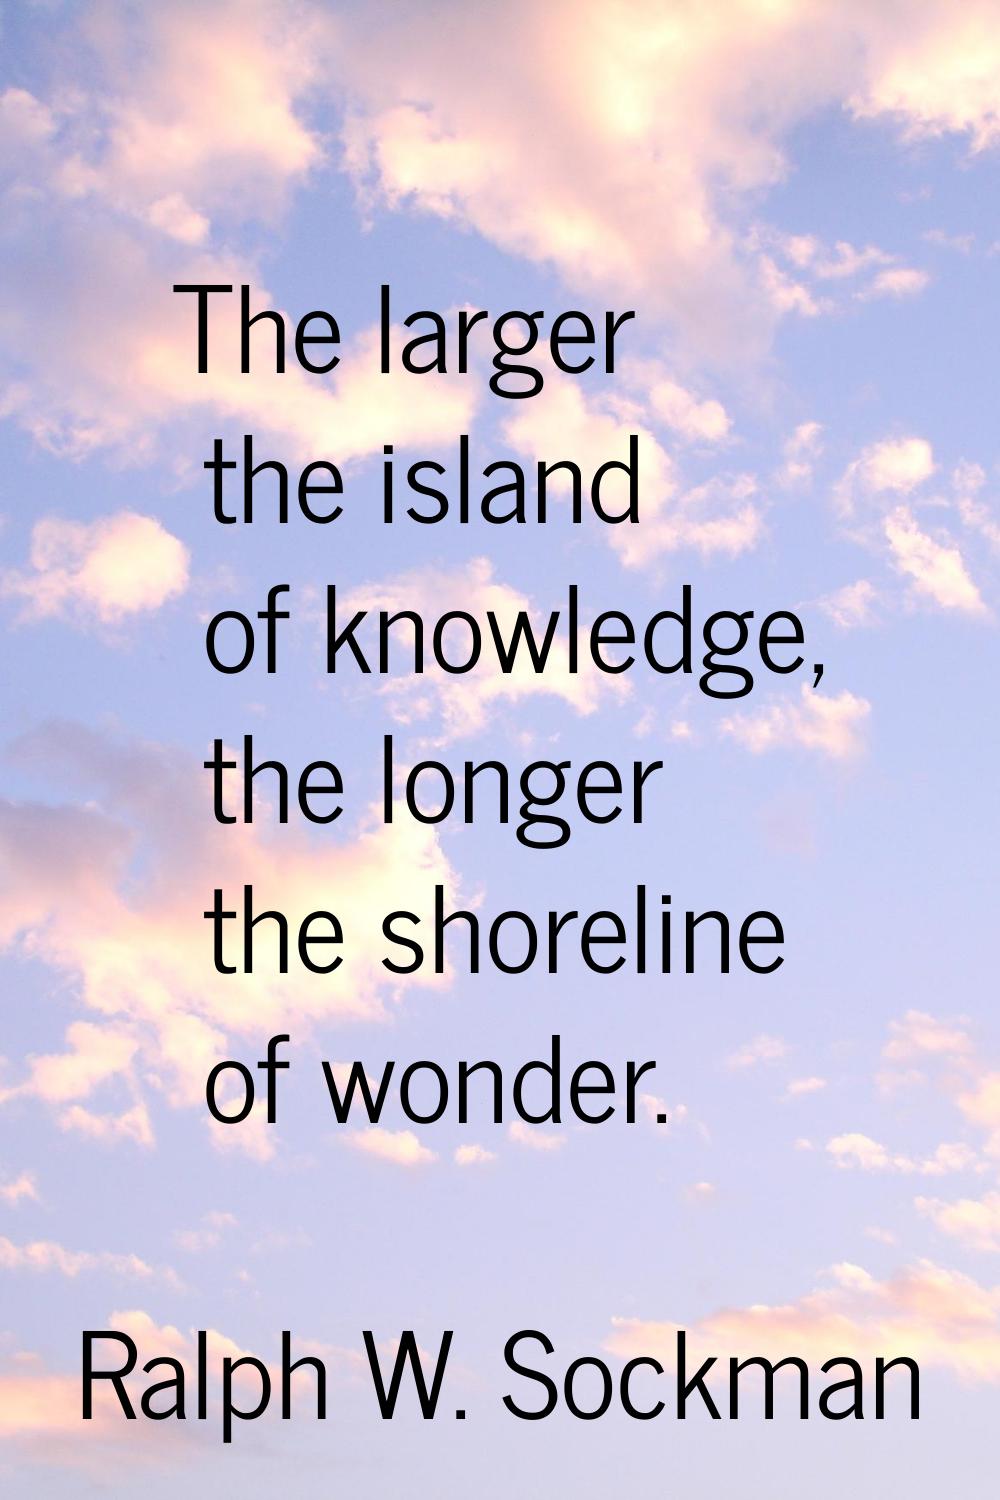 The larger the island of knowledge, the longer the shoreline of wonder.